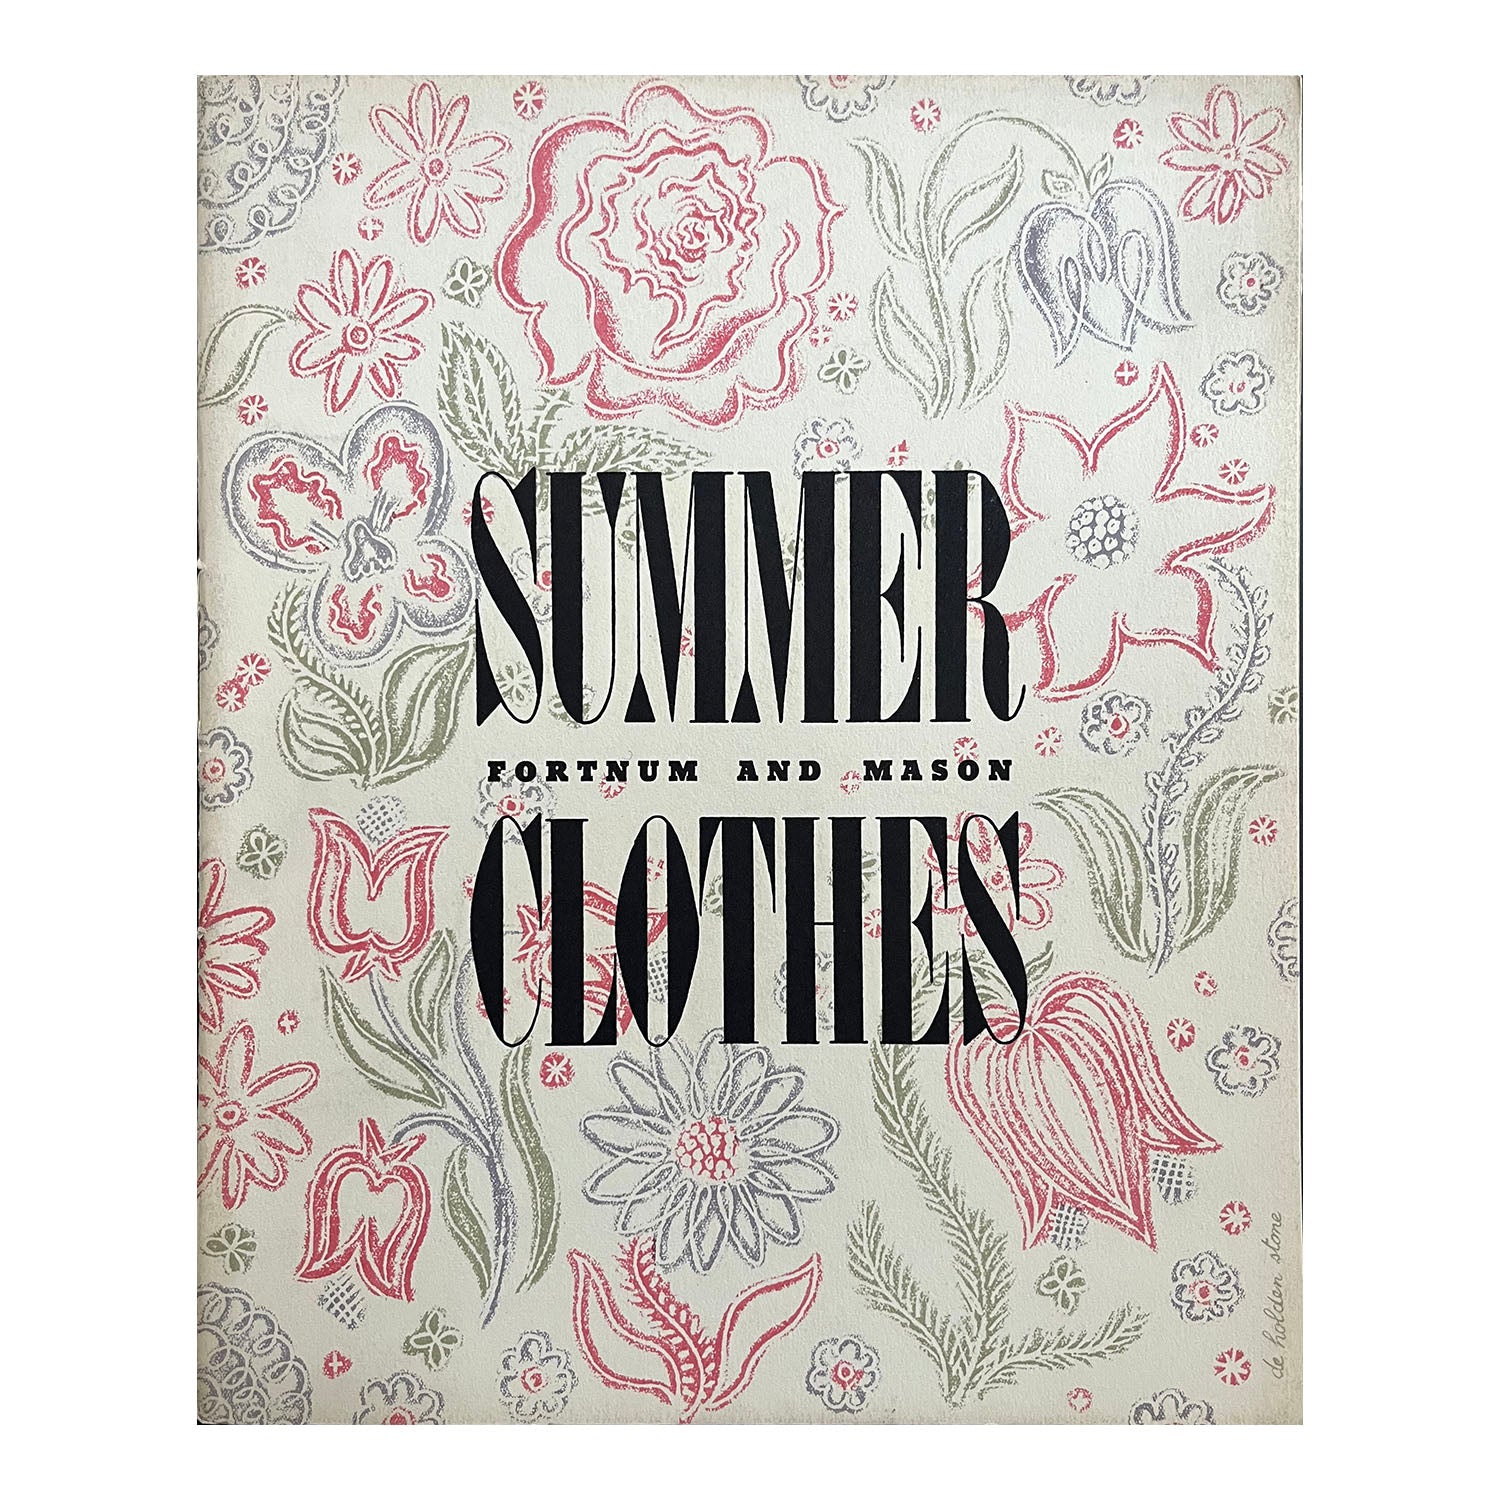 1940s sales brochure, Summer Clothes, published by Fortum & Mason and printed by the Curwen Press. 